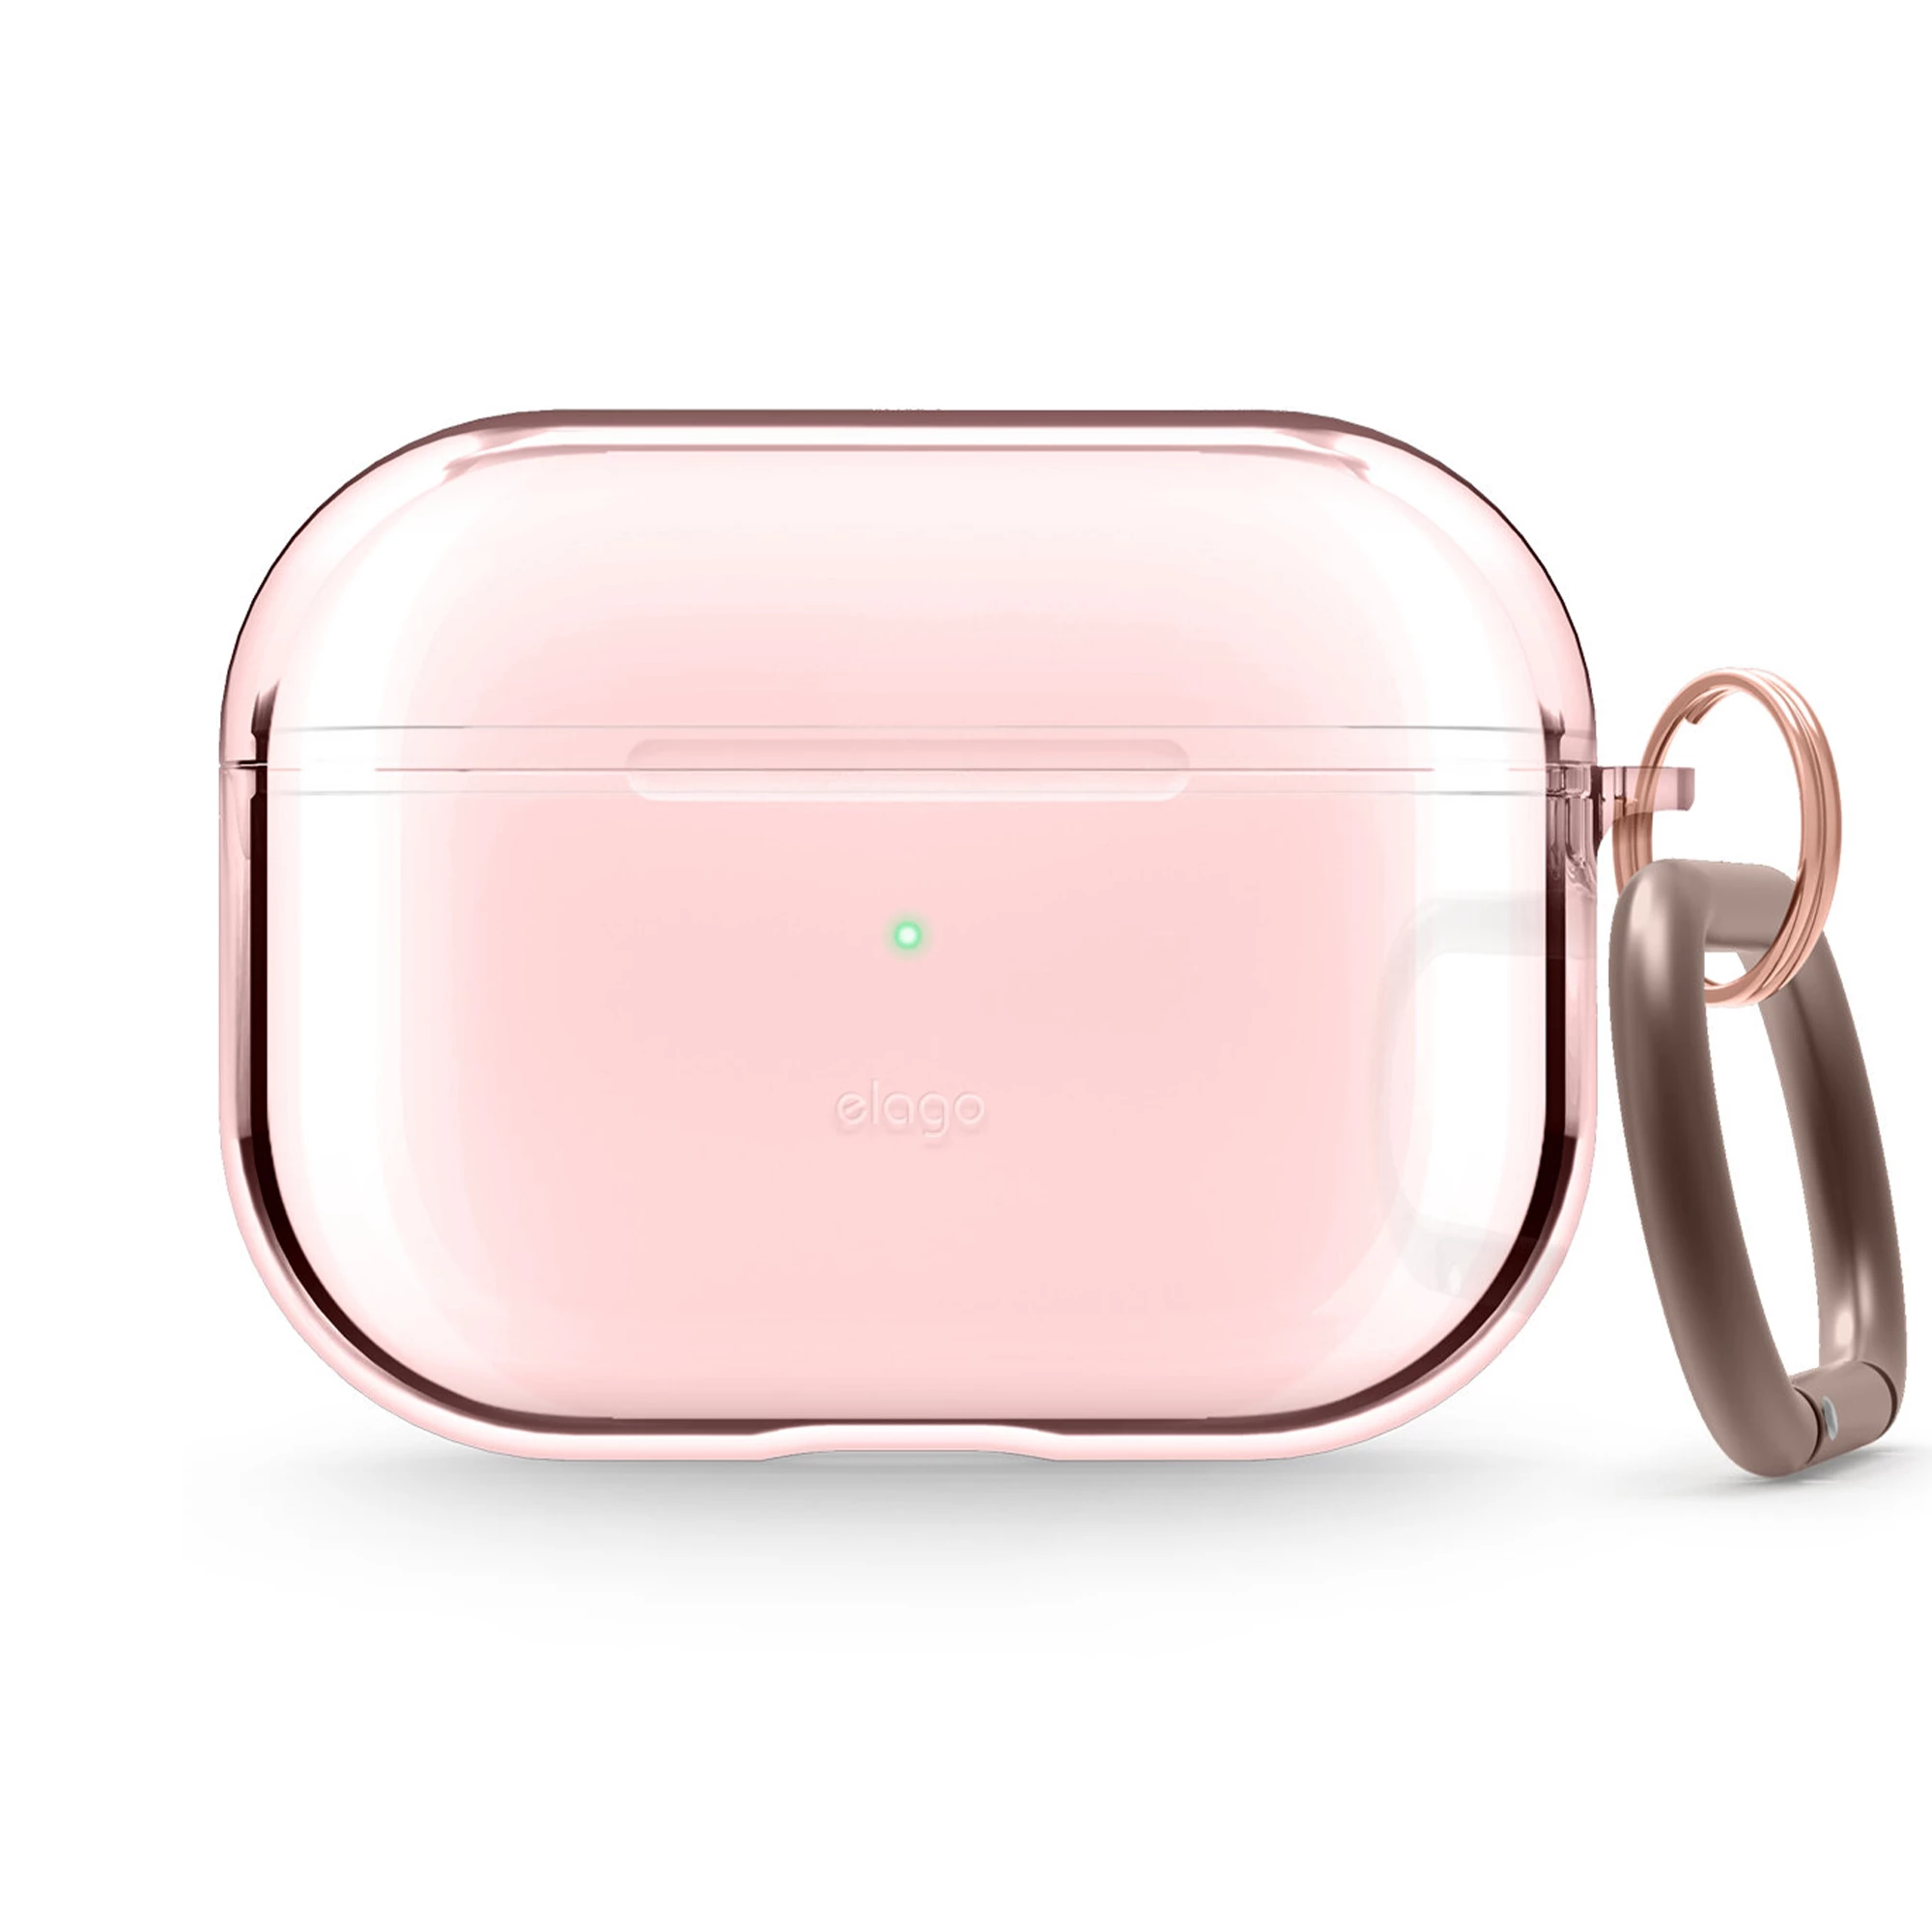 Elago Clear Case for Airpods Pro - Lovely Pink (EAPPCL-HANG-LPK)